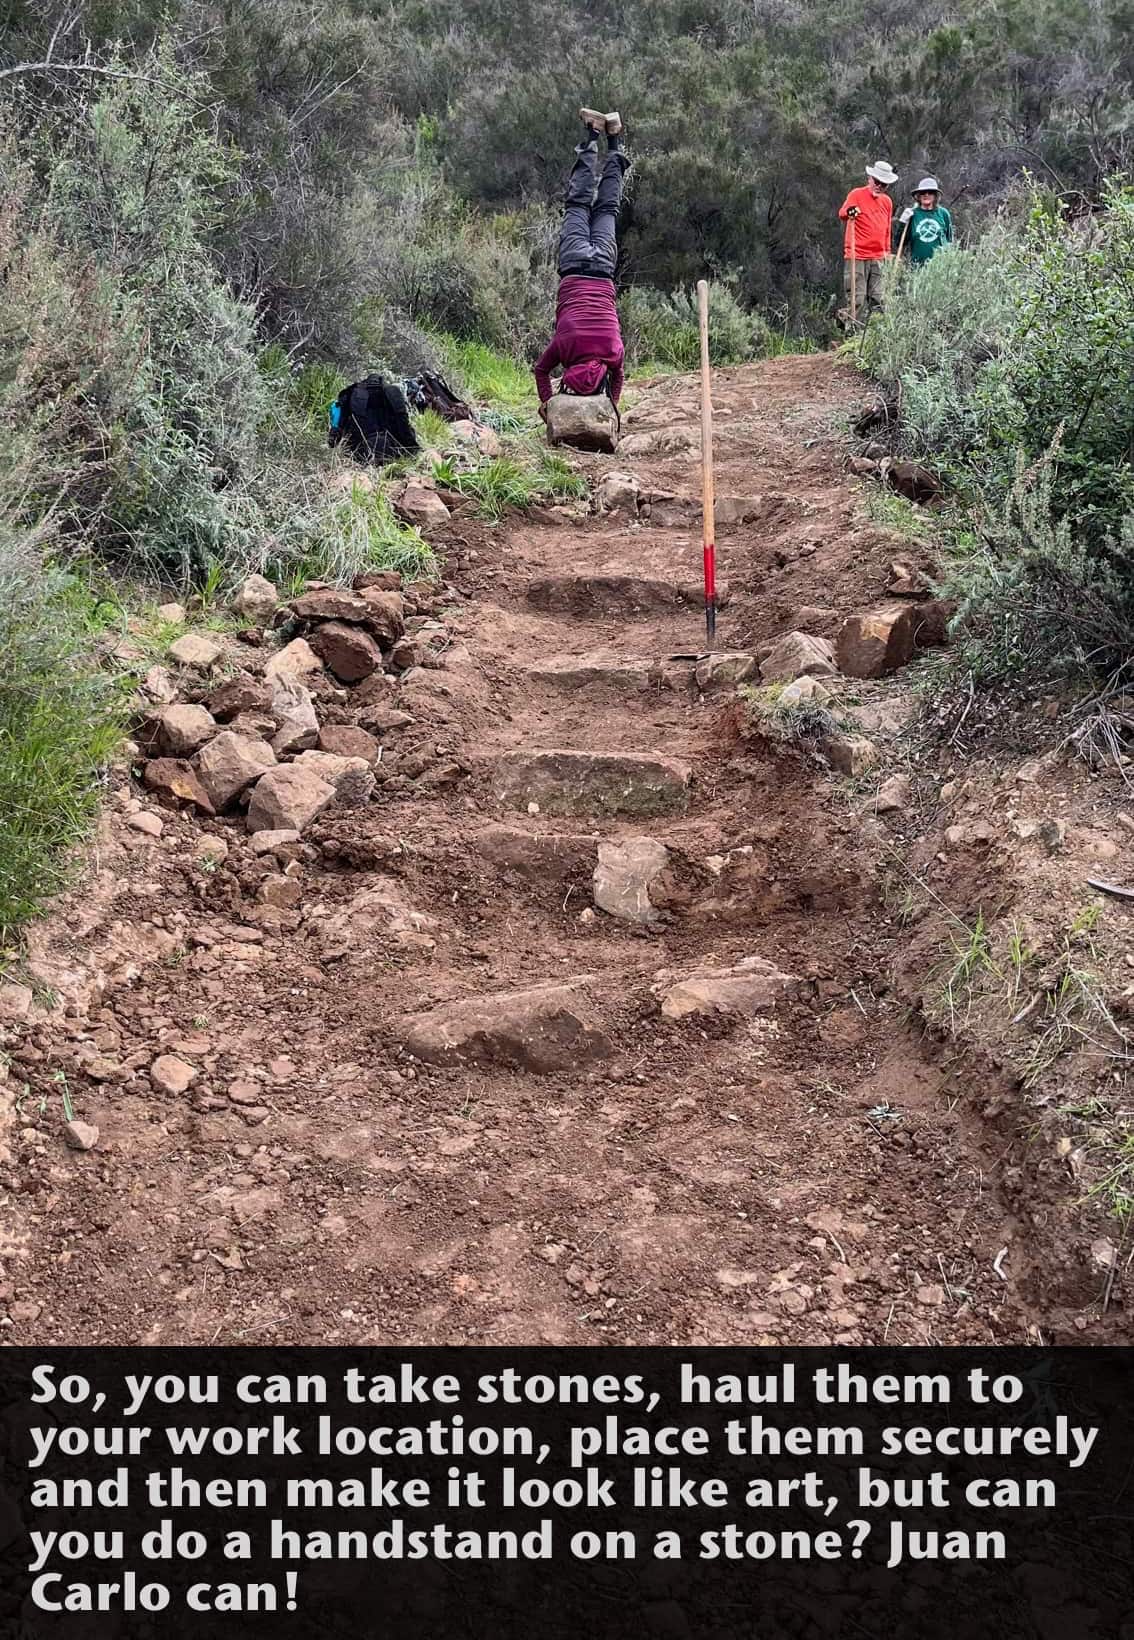 image from our trail work event